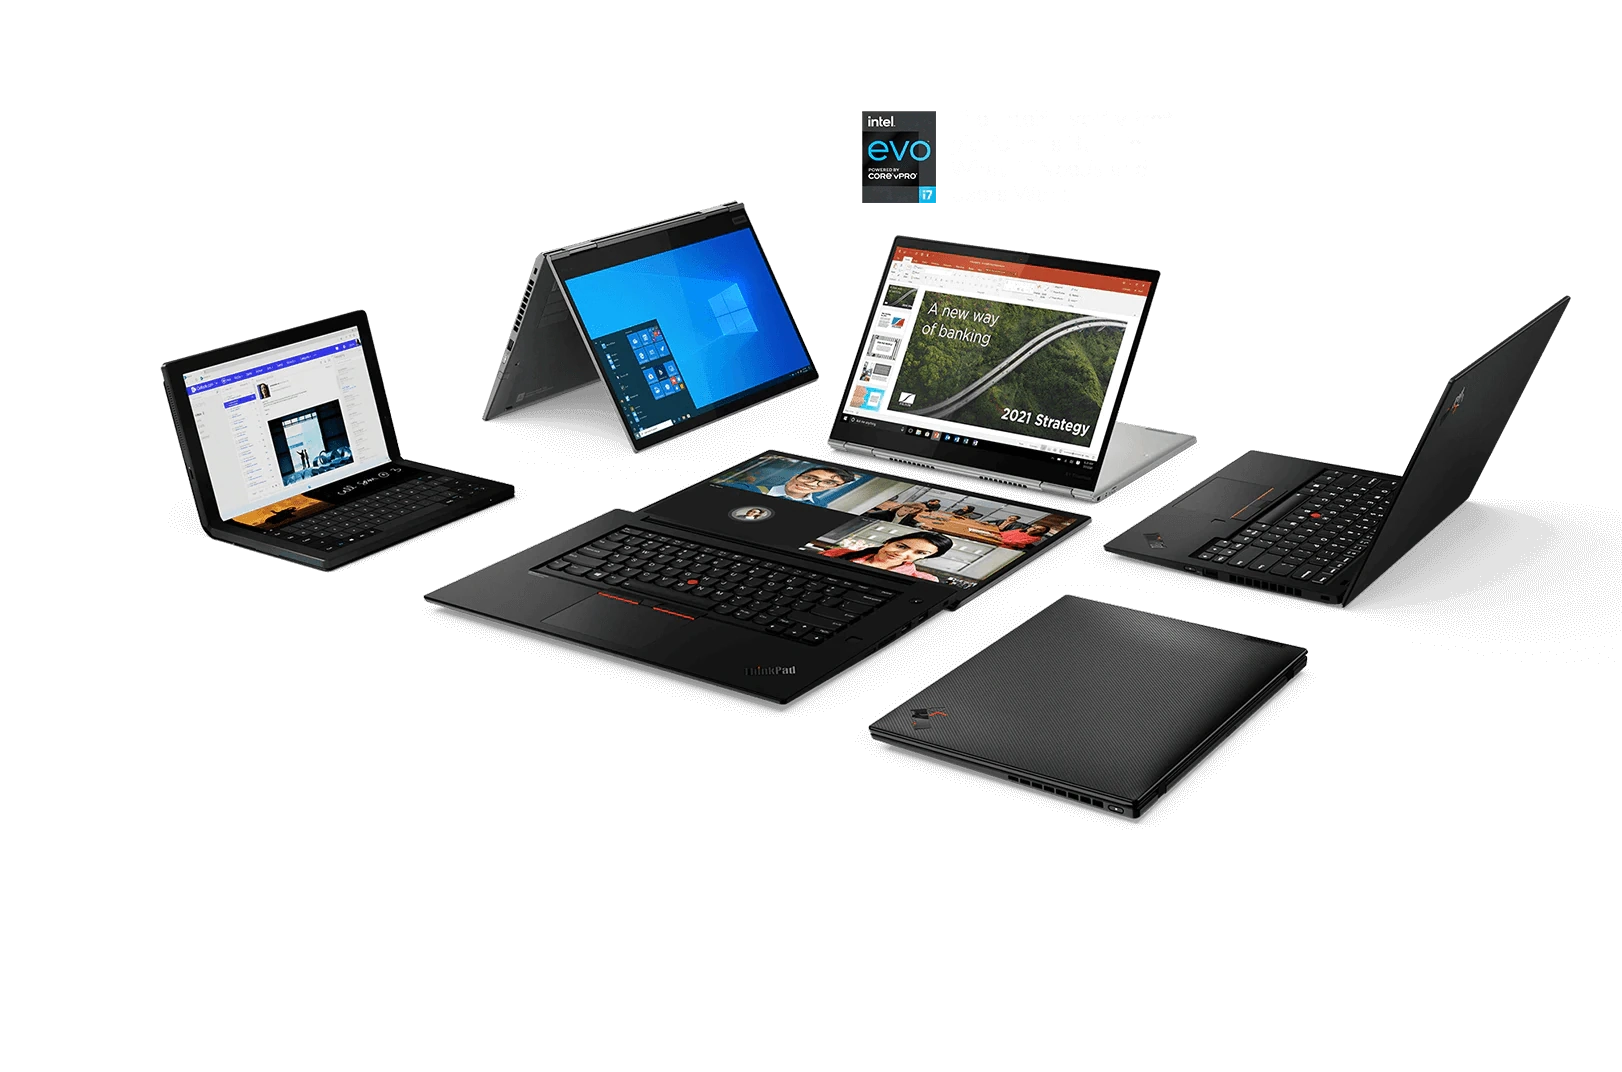 Two ThinkPad X1 Carbon laptops